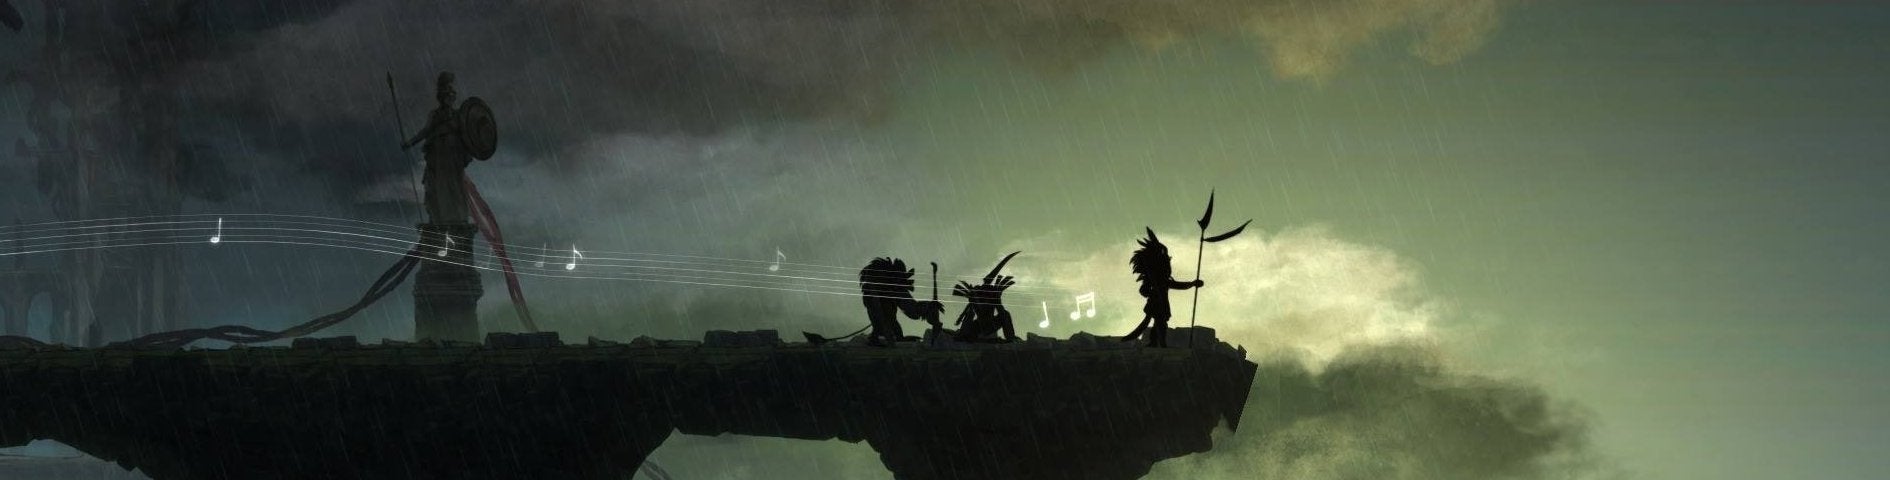 Image for Child of Light review